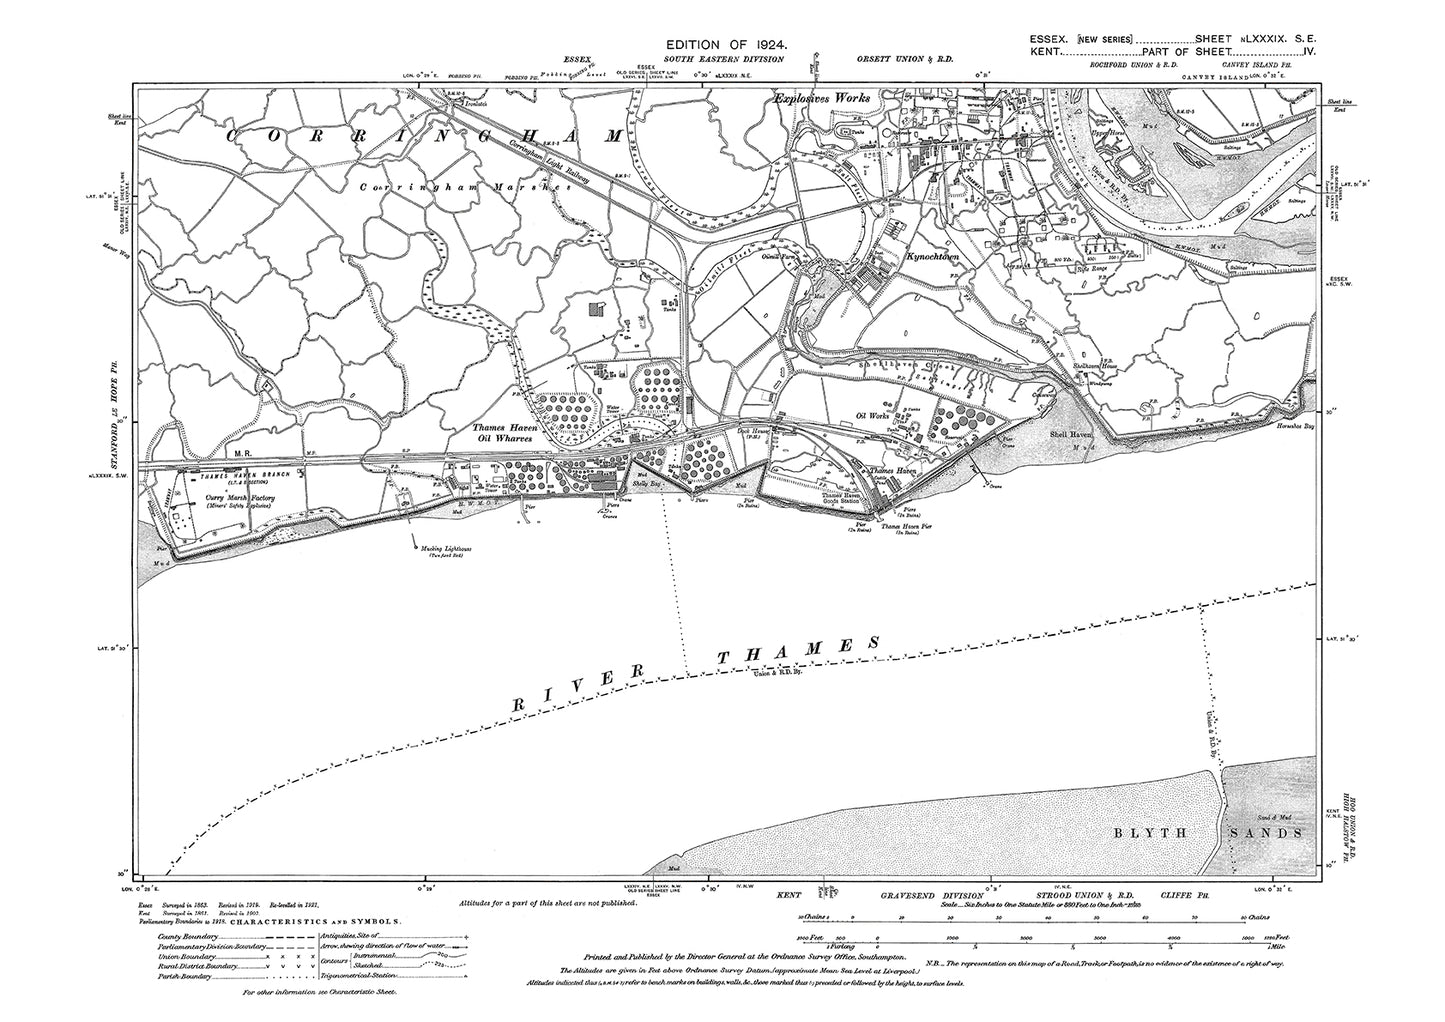 Old OS map dated 1924, showing Thames Haven and Kynochtown in Essex - 89SE